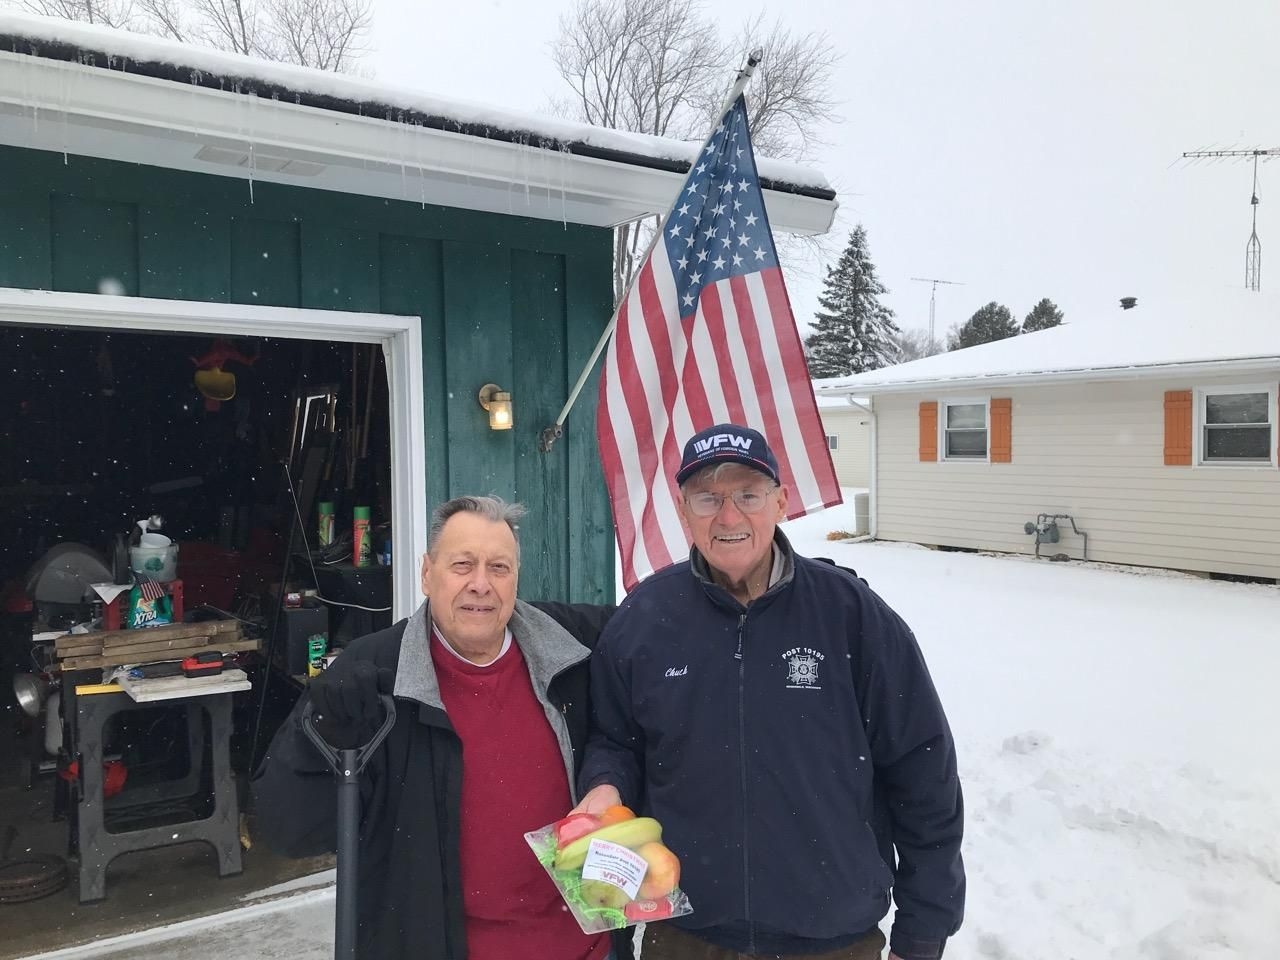 Chuck Rusch delivers a fruit basket to Al Schultz of Rosendale